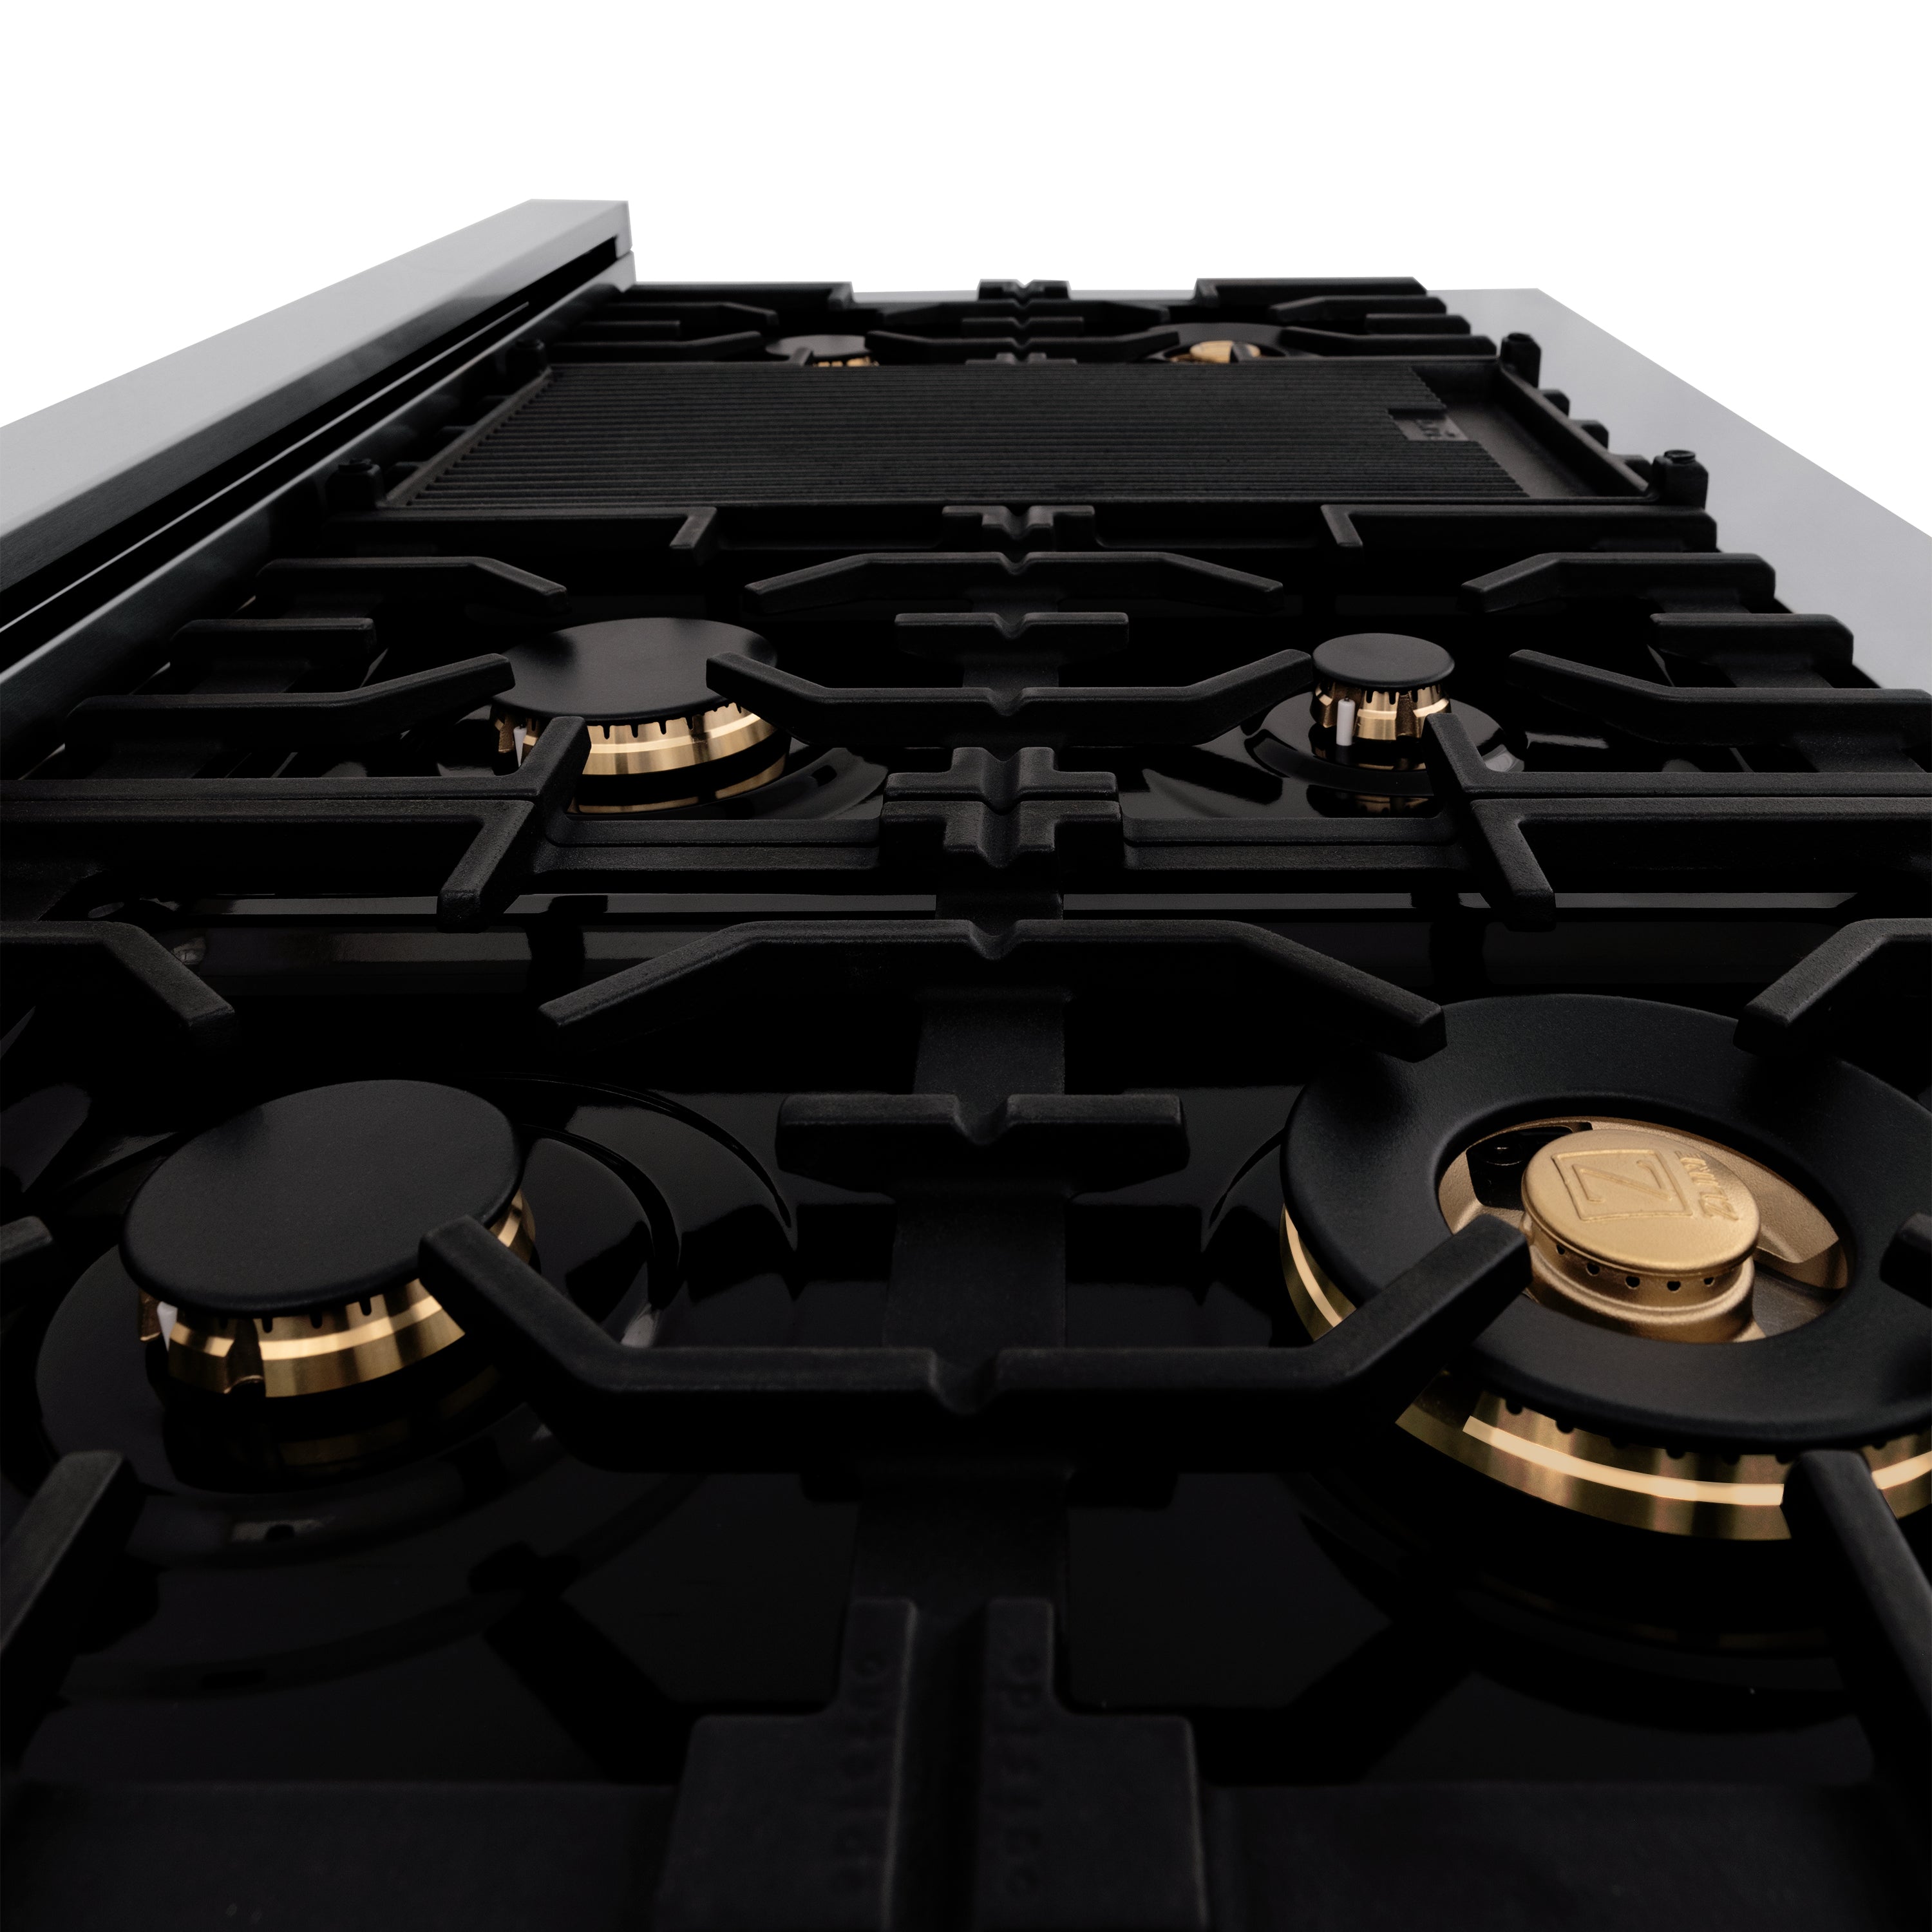 ZLINE Autograph Edition 48" Porcelain Rangetop with 7 Gas Burners in Stainless Steel and Accents (RTZ-48)